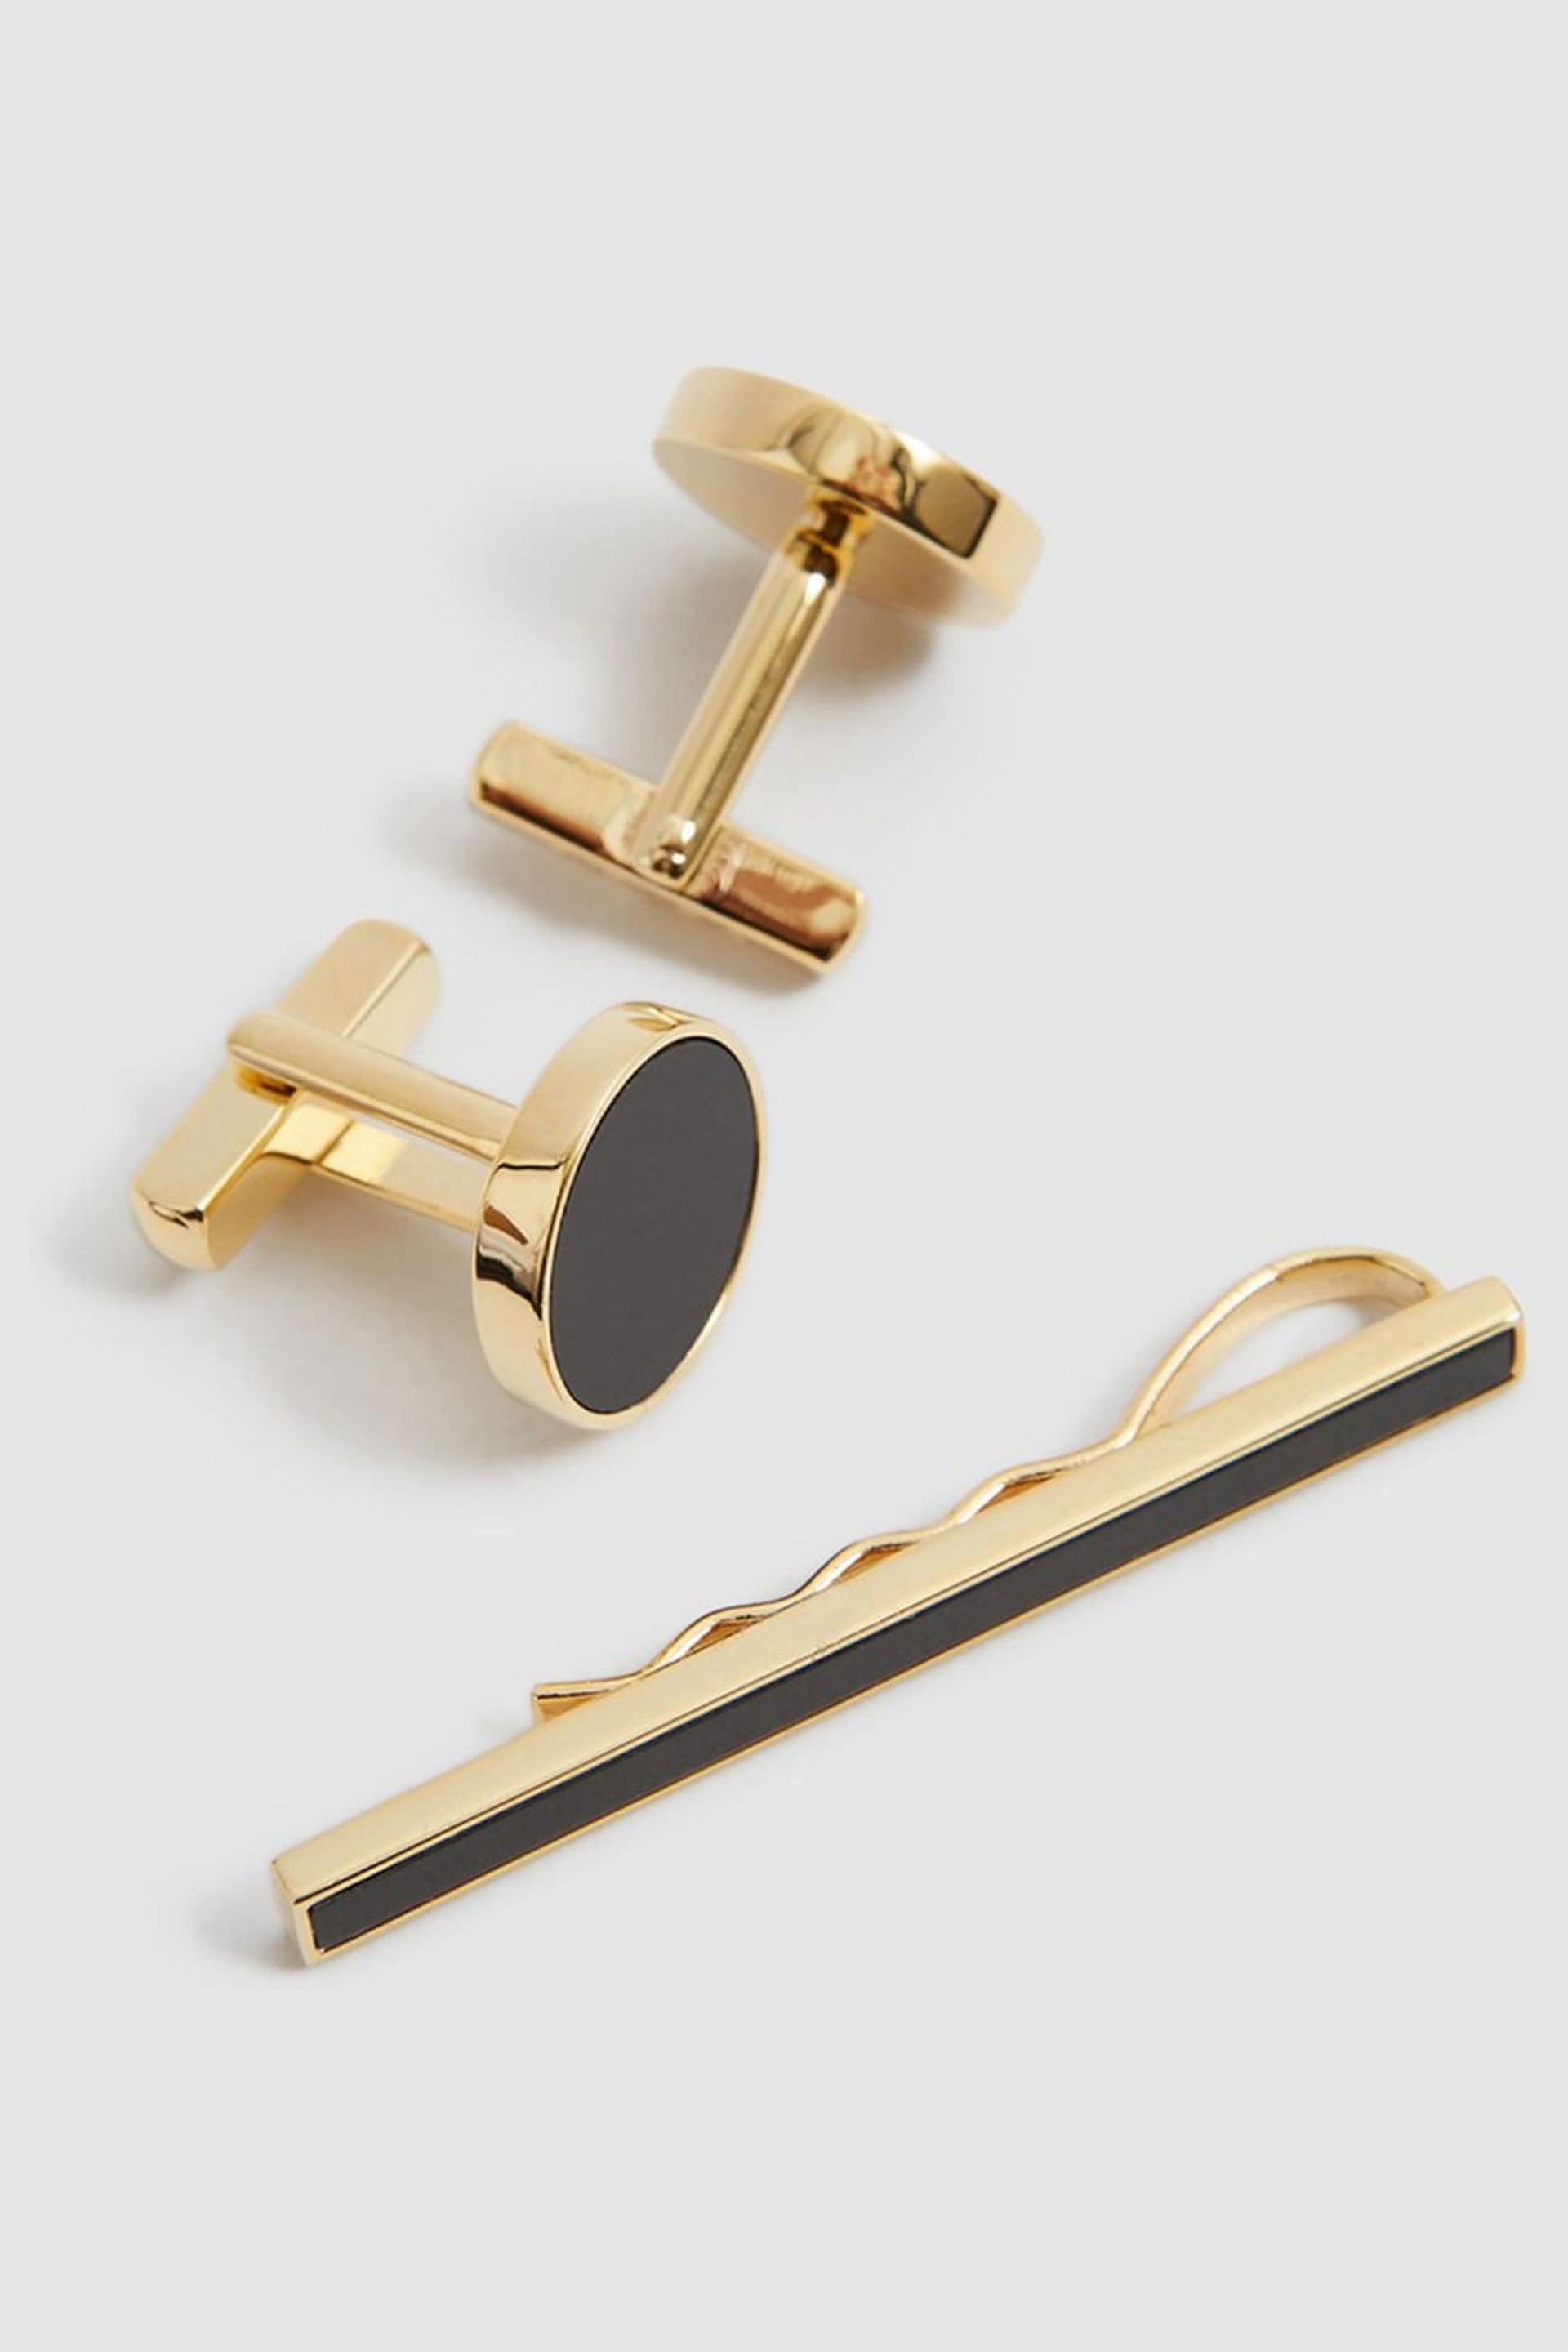 Reiss Gold Ardley Cufflink And Tie Bar Set - Image 4 of 4